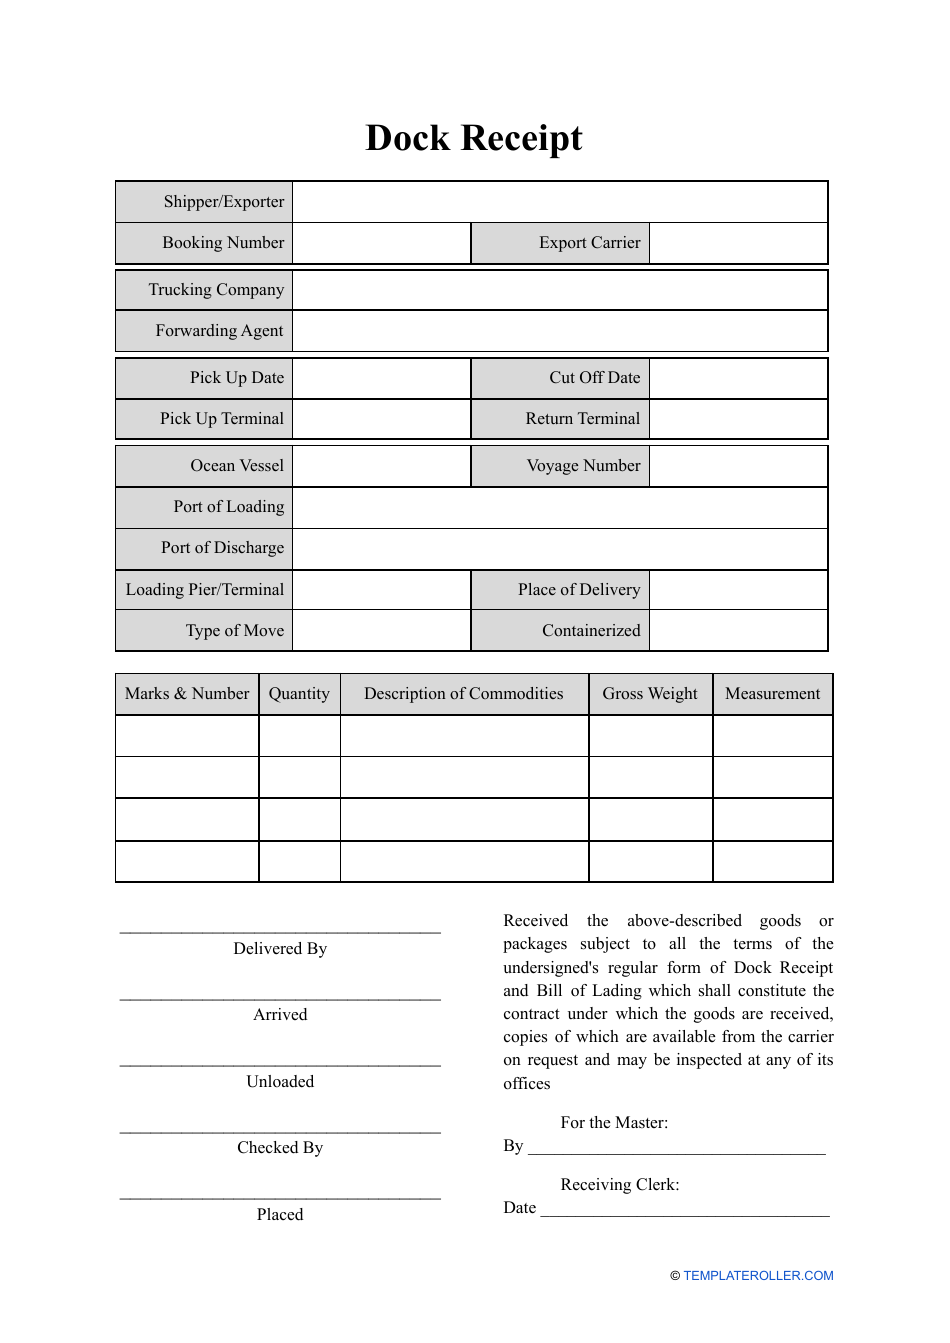 Dock Receipt Template, Page 1